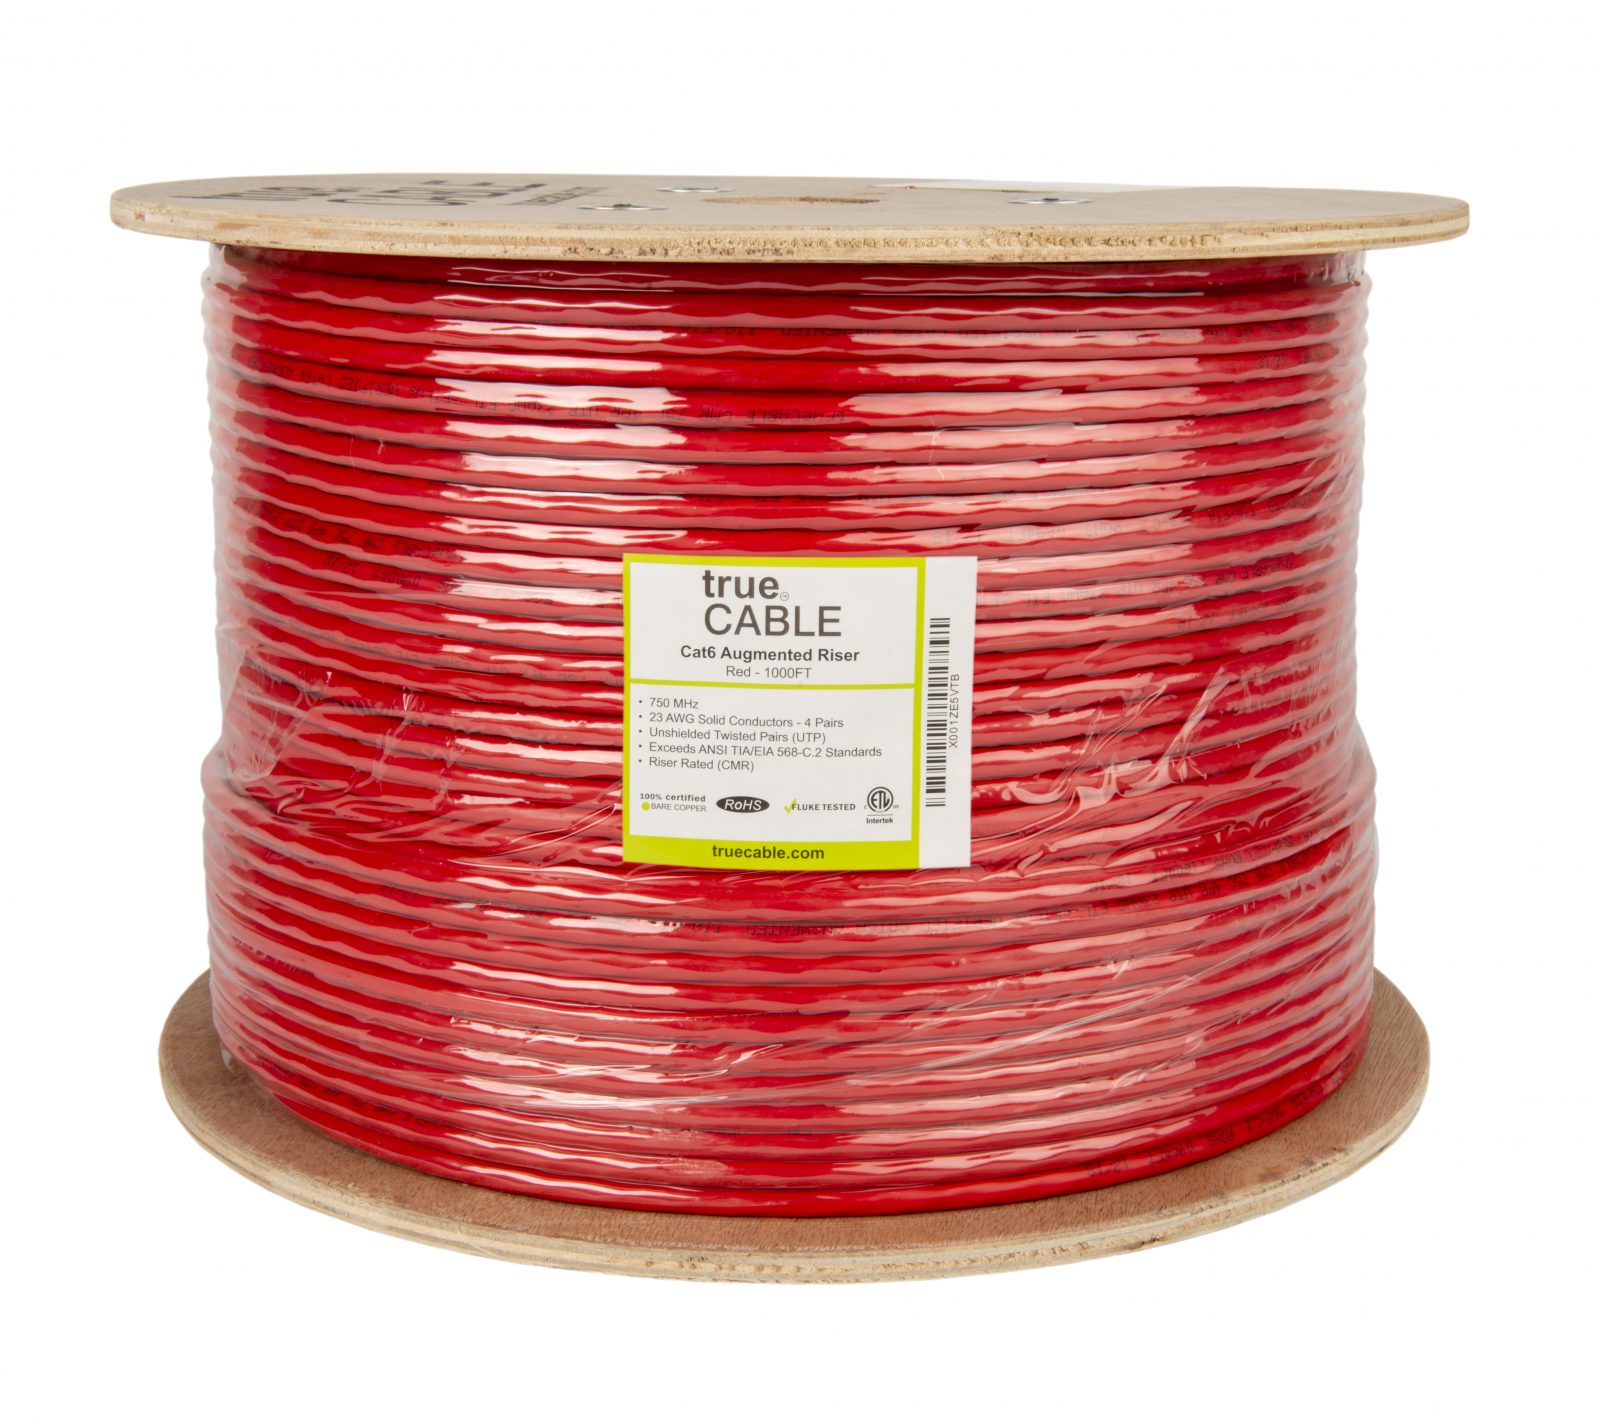 True Cable red cable reel wrapped photographed by Robintek Photography